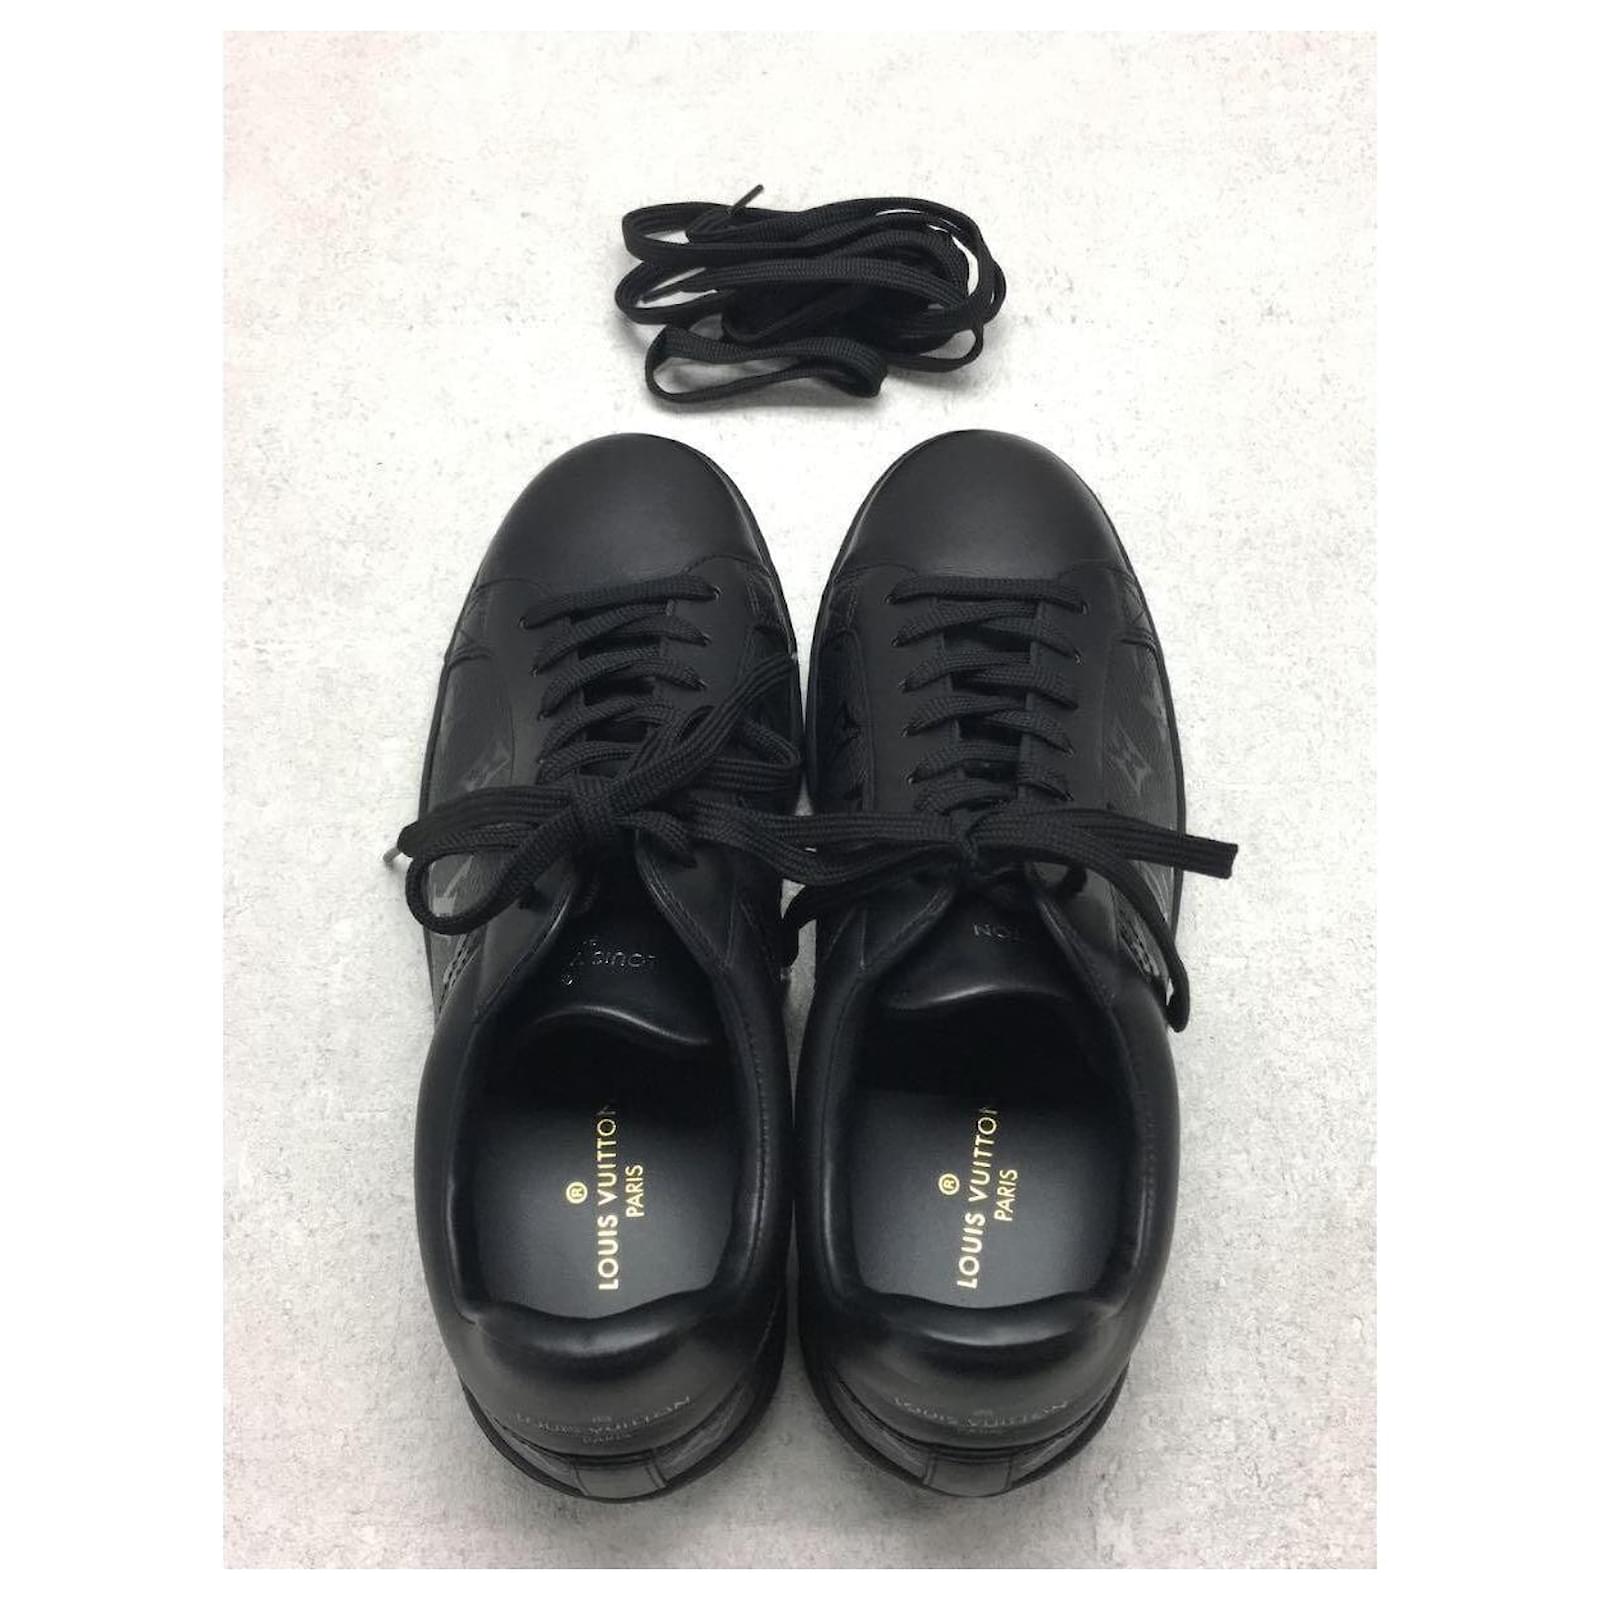 LOUIS VUITTON Luxembourg / low-cut sneakers / US5 / BLK / Leather